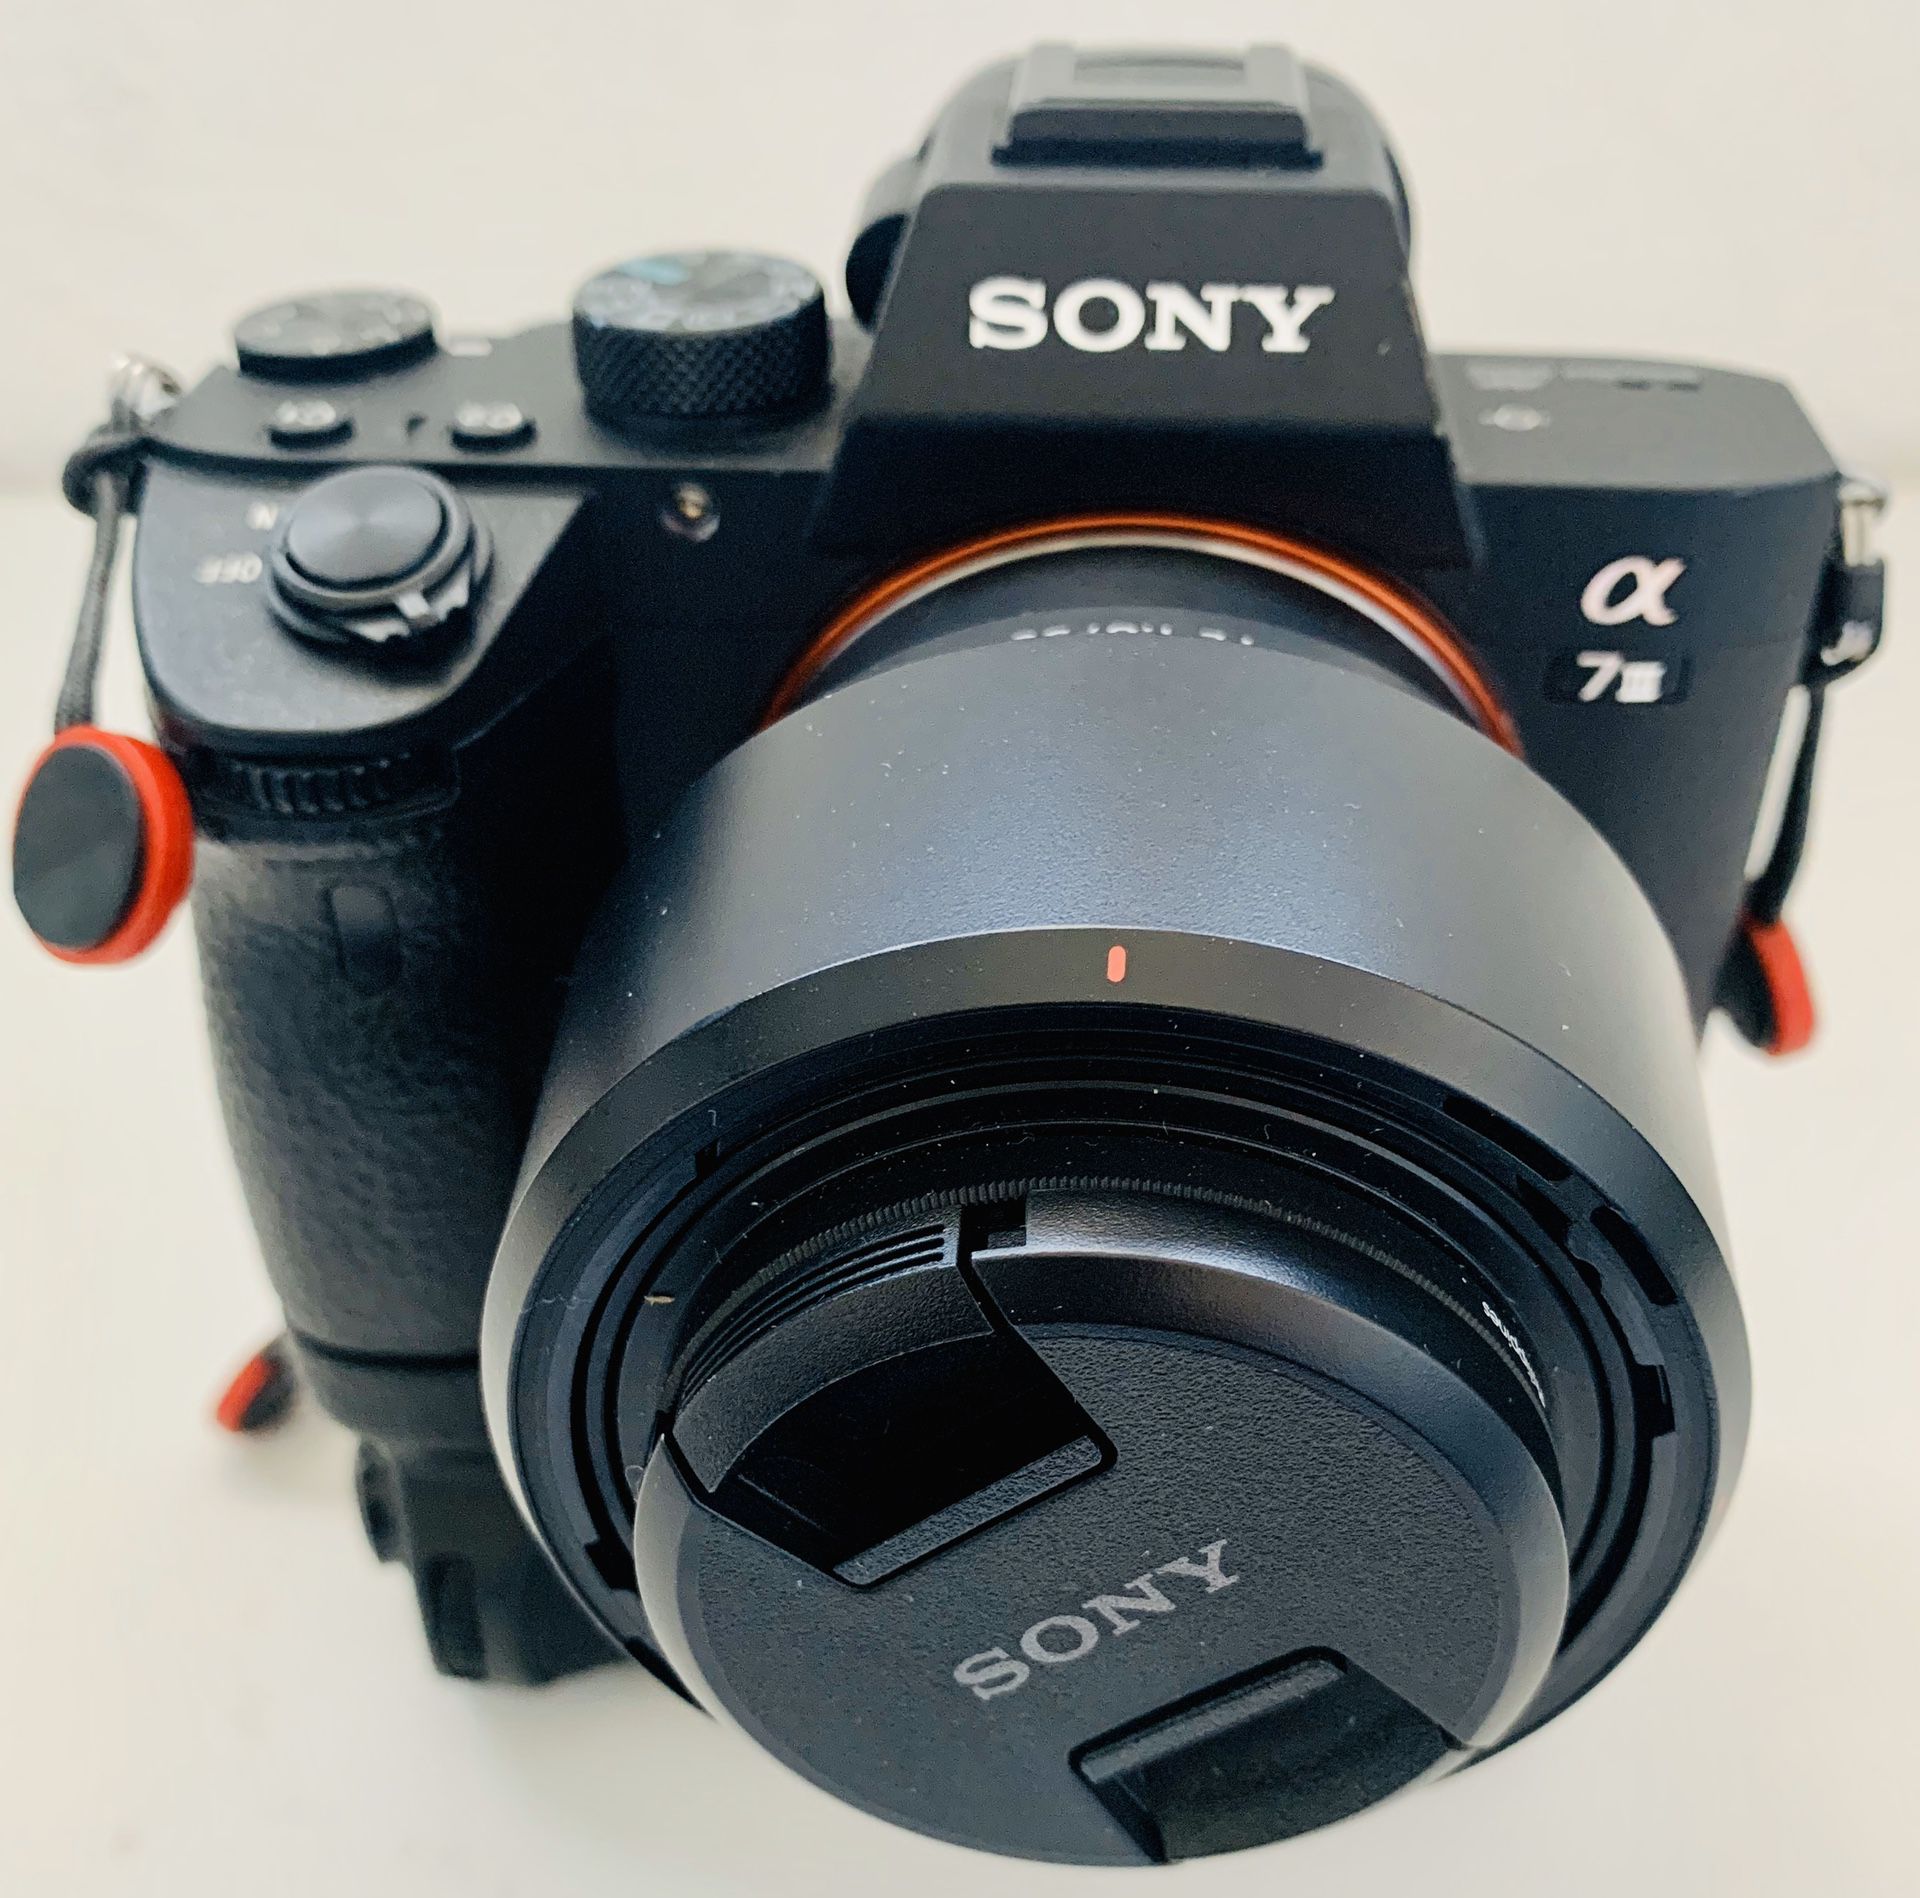 Sony a7iii with battery grip and 50mm lens